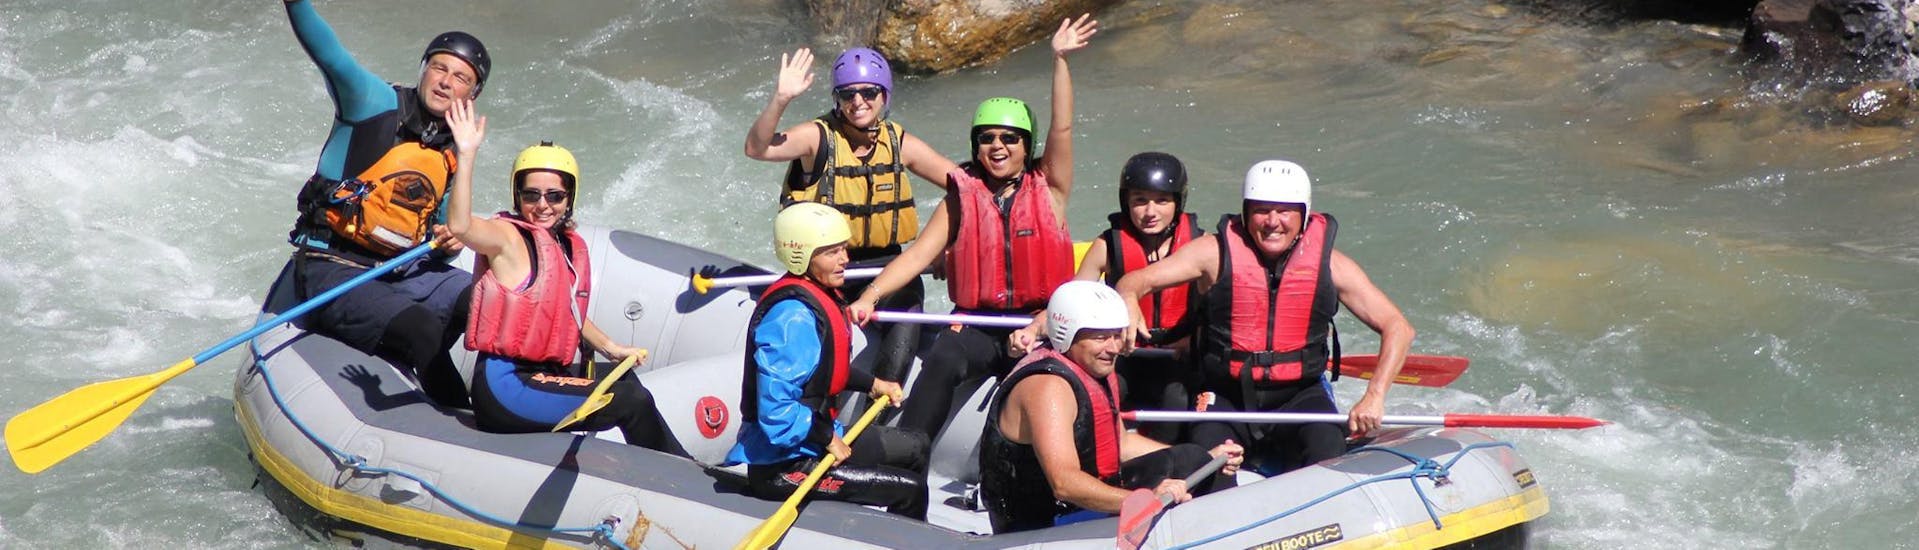 A group of rafters is having fun on a rafting tour on the Salzach River with Rafting Center Taxenbach.